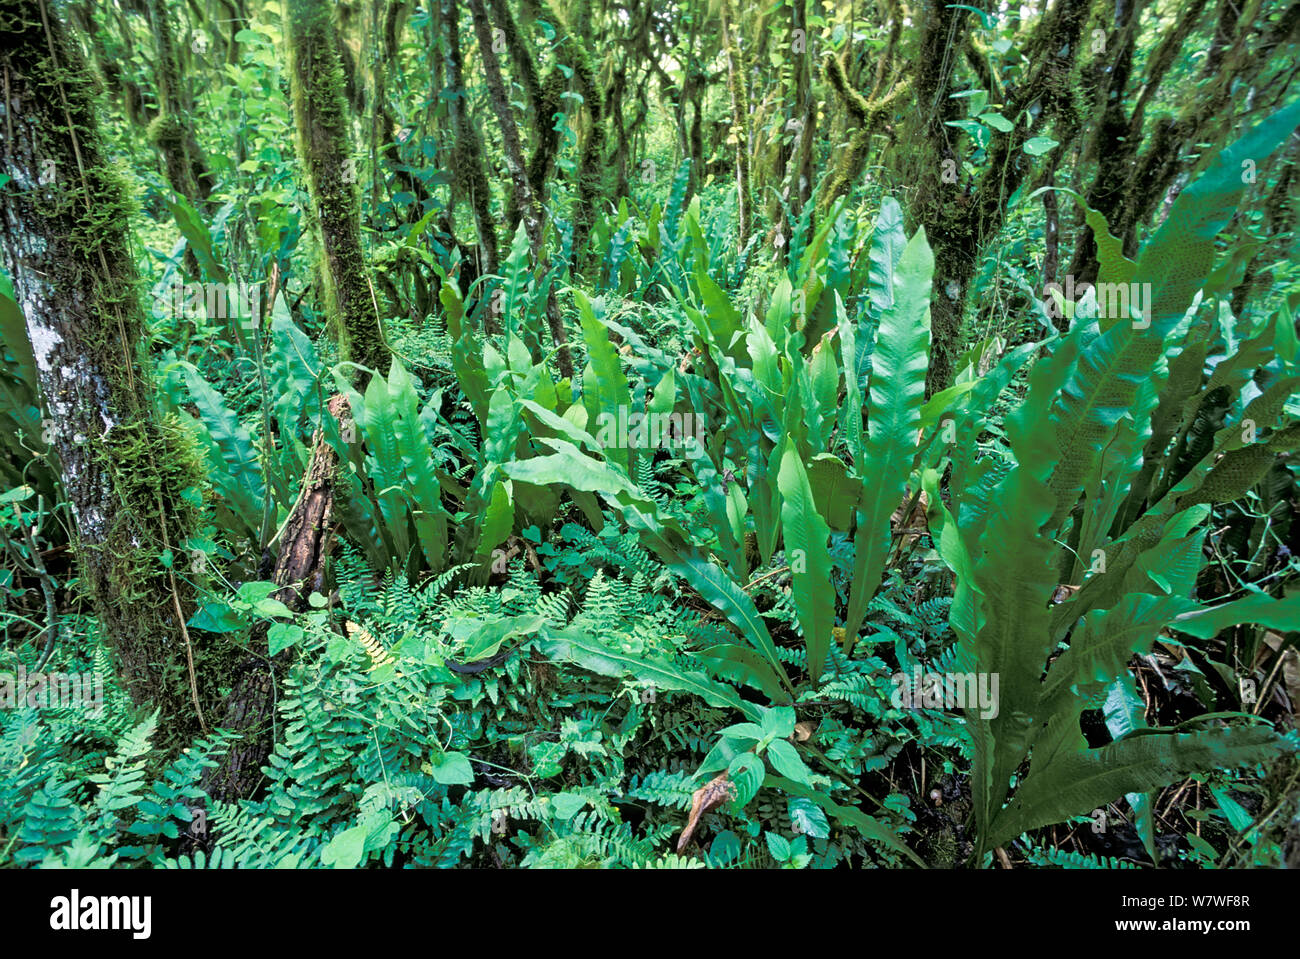 Fern laden understory of Scalesia Forest (Scalesia) during cold season, Galapagos Islands. Stock Photo